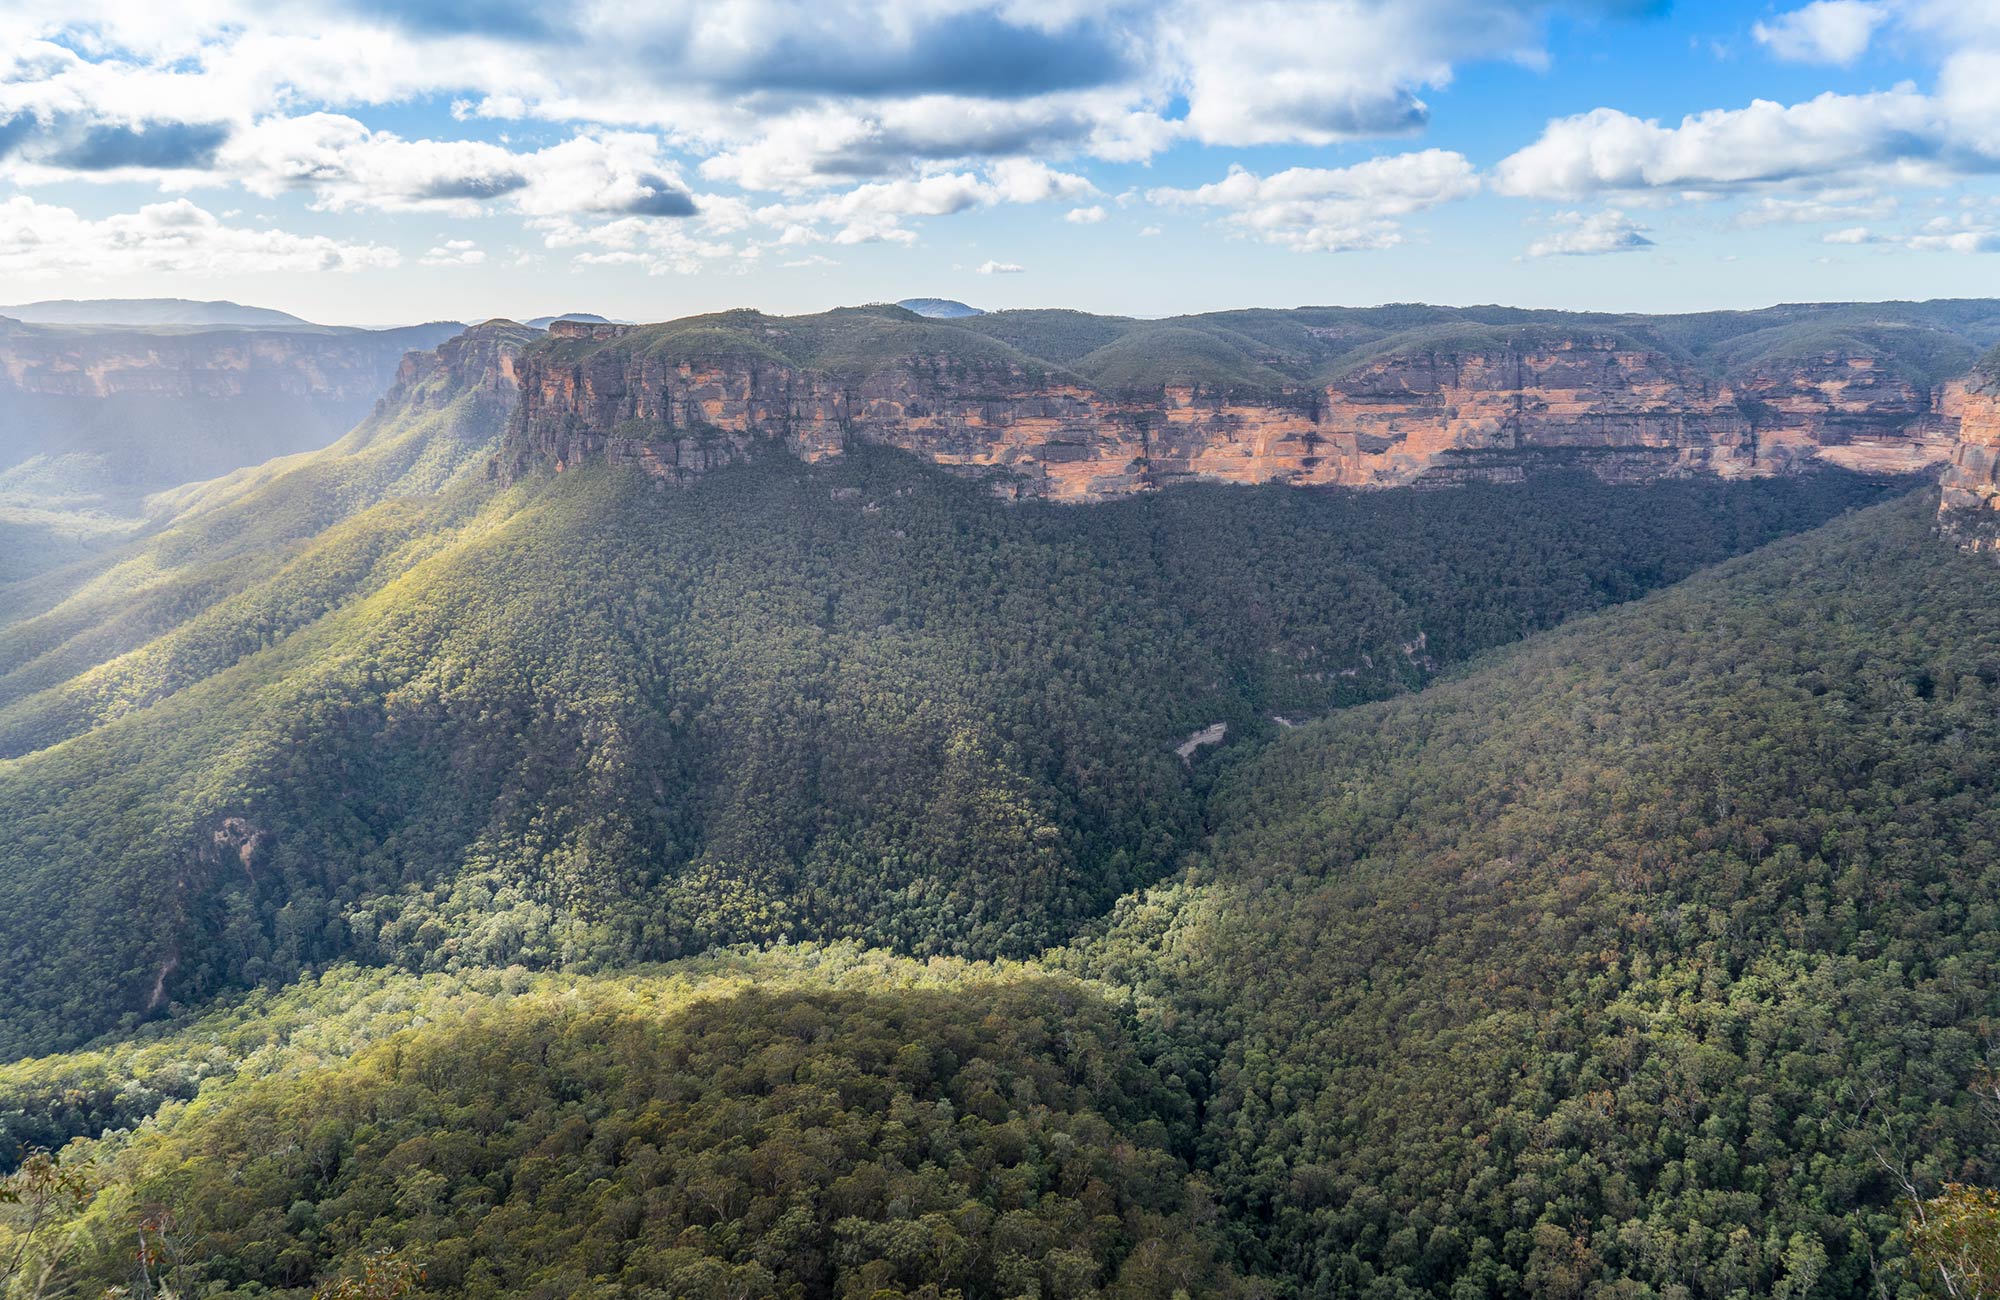 Views of Grose Valley from Evans lookout, Blue Mountains National Park. Photo: Simone Cottrell/OEH.